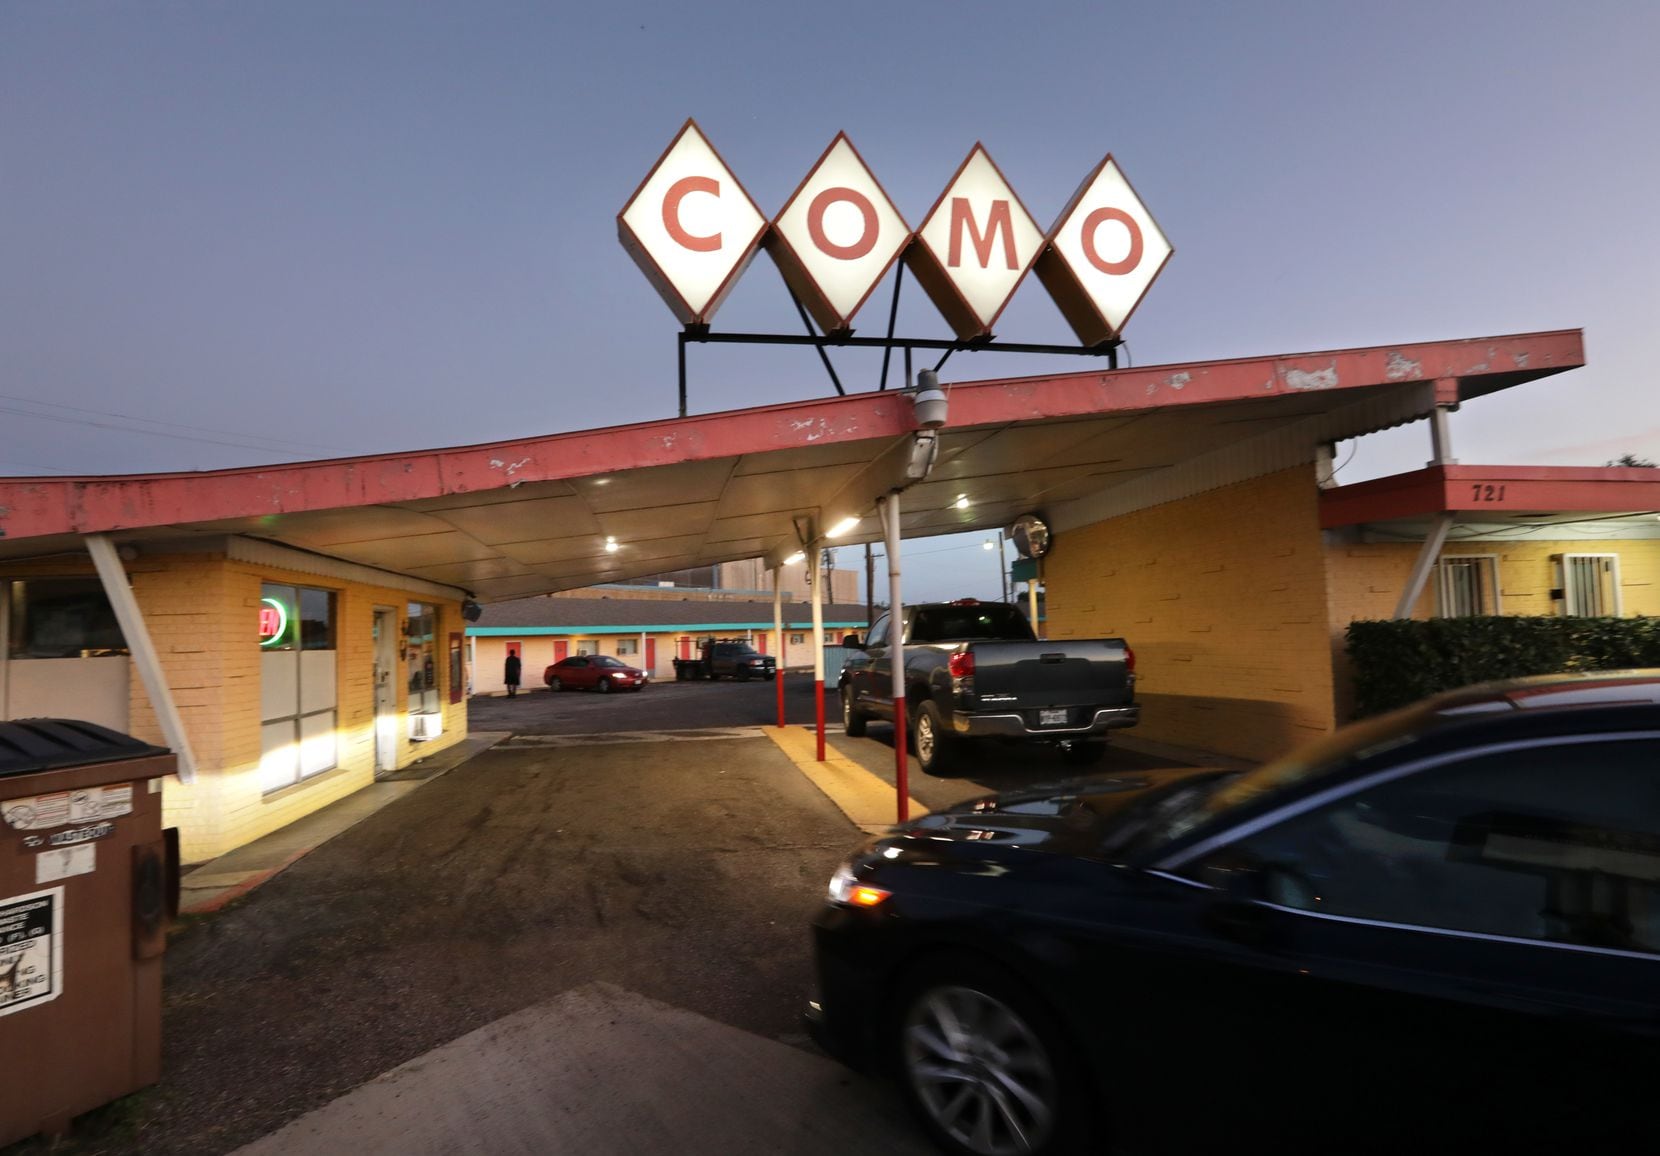 At the Como Motel in Richardson, the manager Alma Jordan says visitors still ask about the...